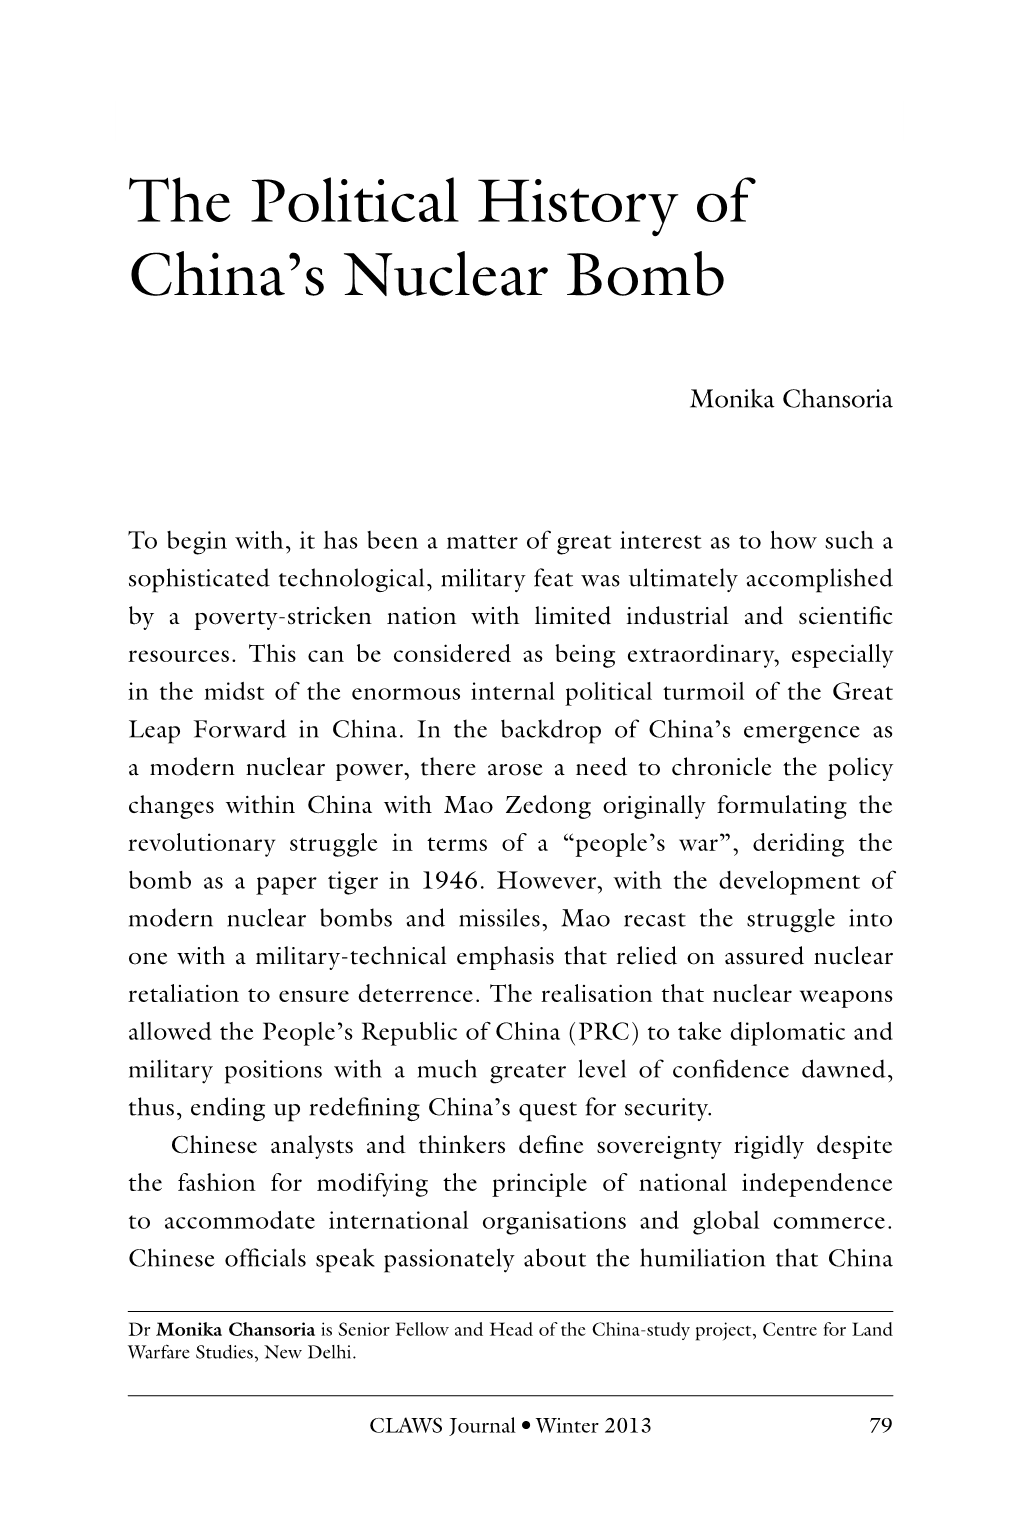 The Political History of China's Nuclear Bomb